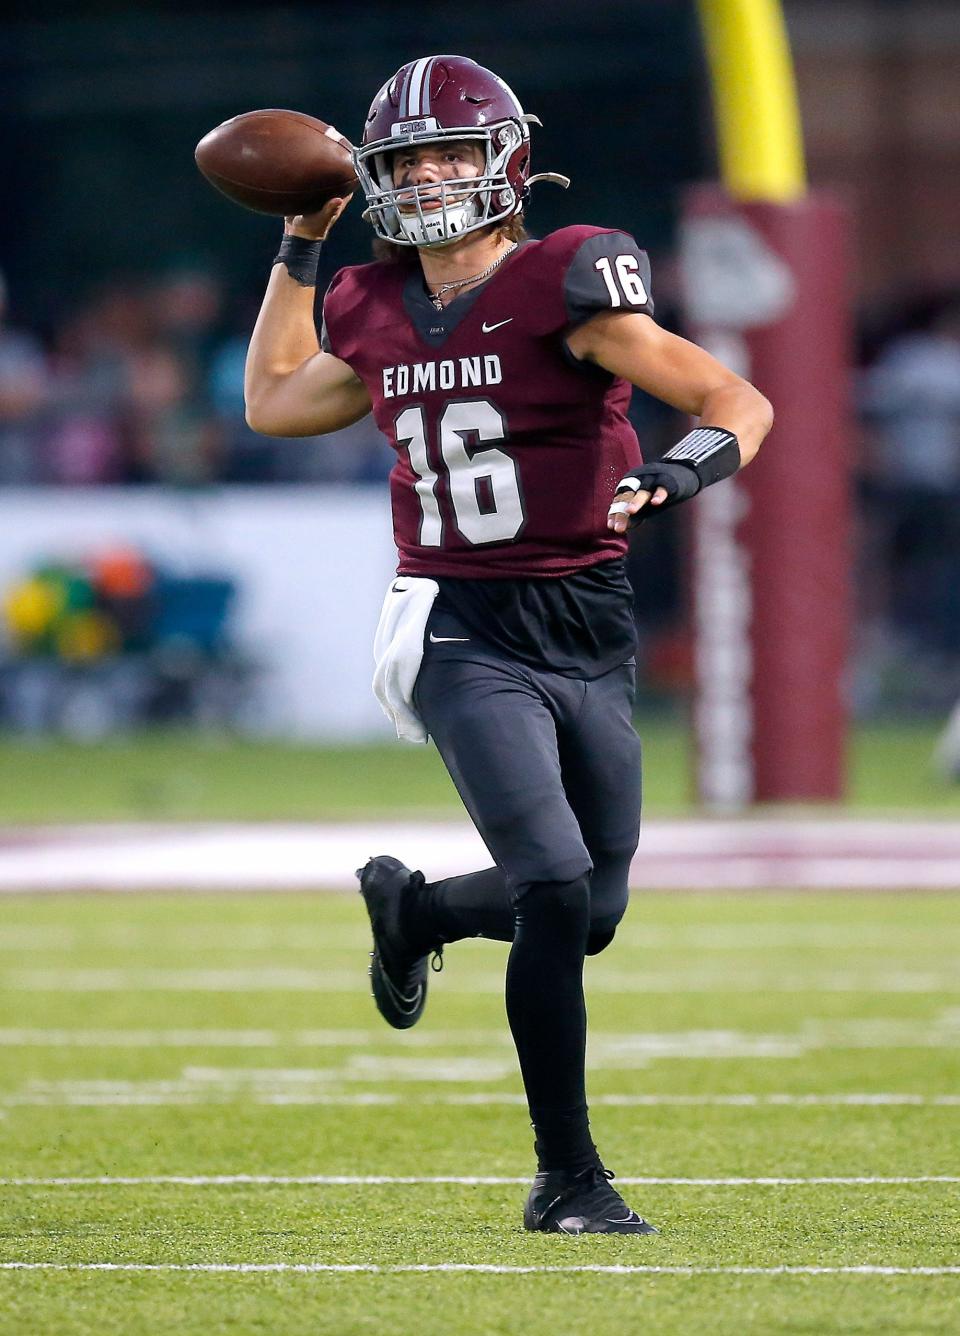 Edmond Memorial junior quarterback and Kansas commit David McComb had four passing touchdowns despite not playing down the stretch.